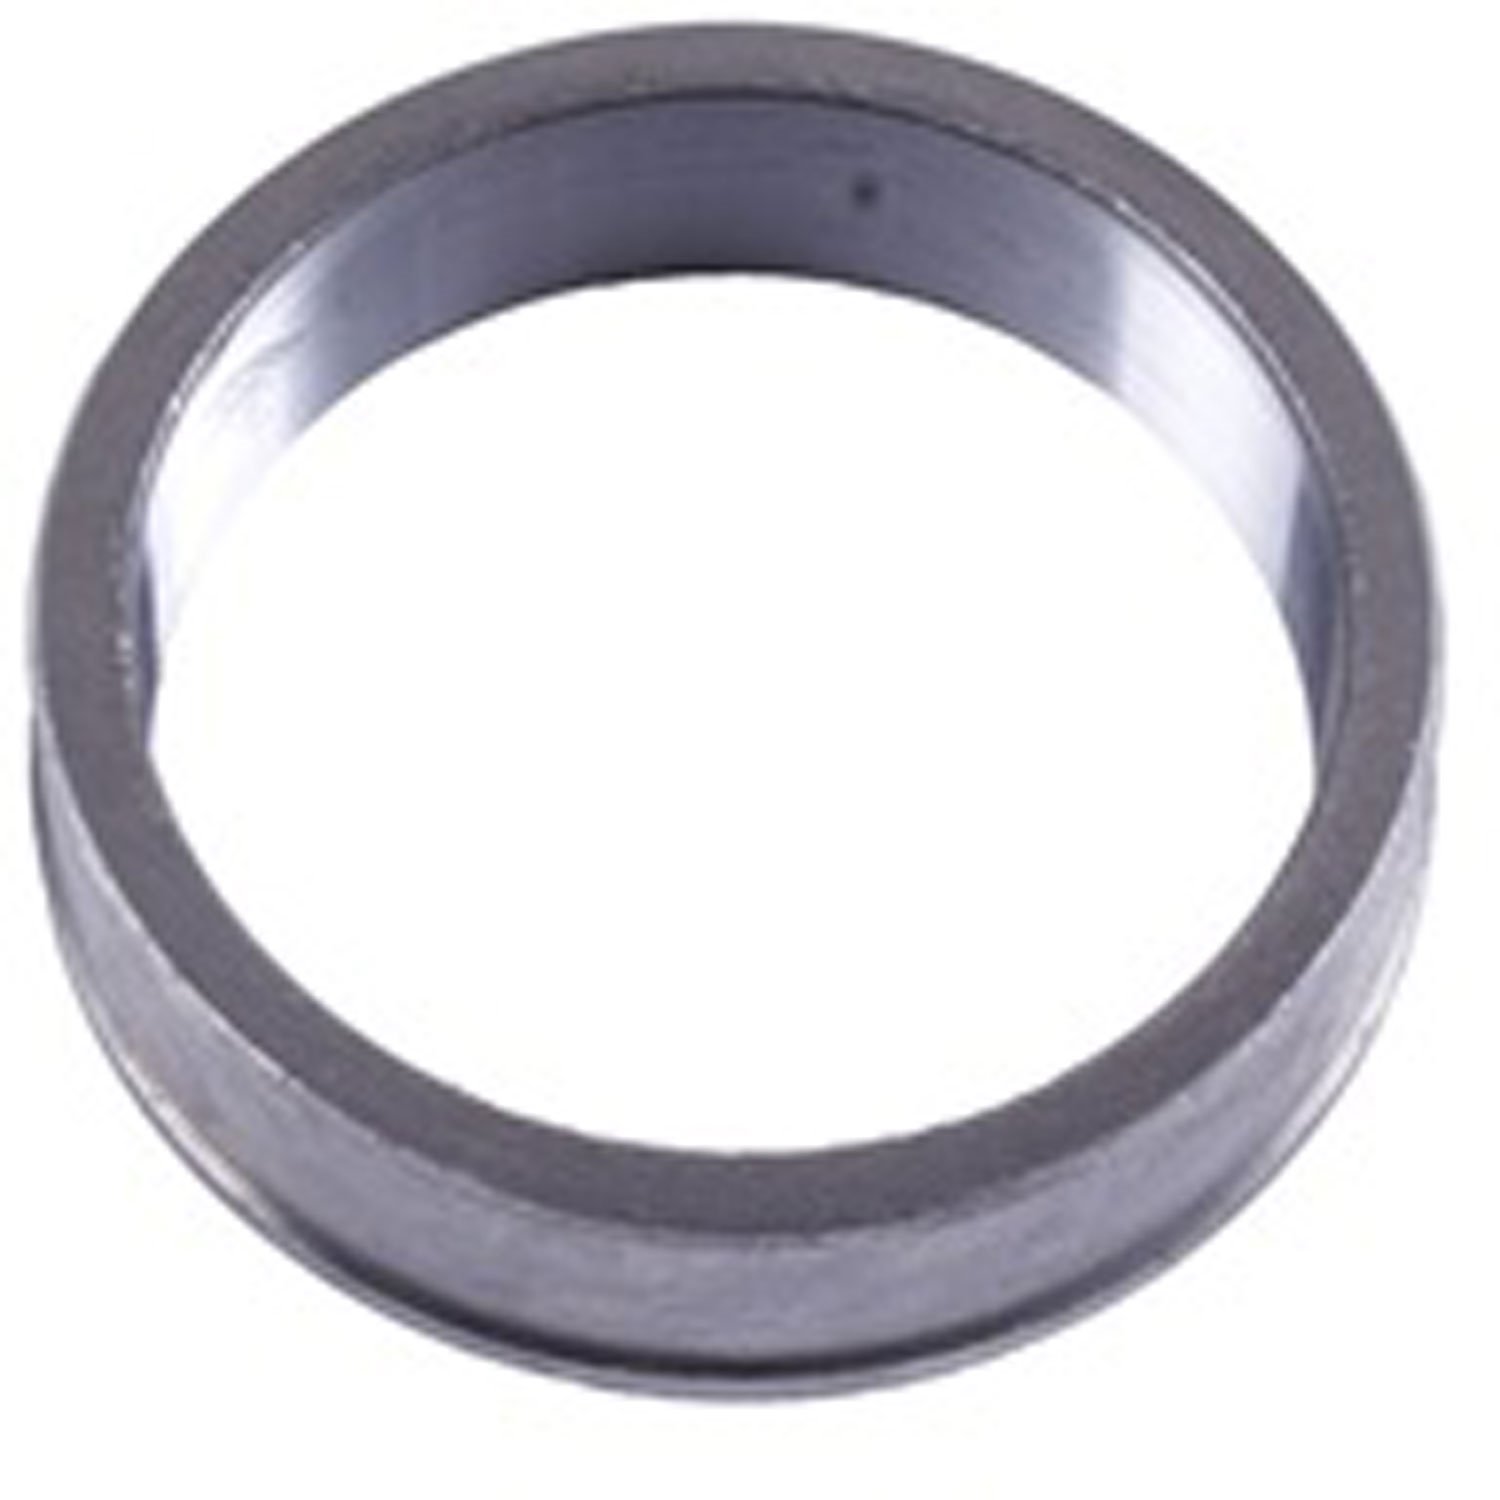 This one piece axle conversion axle bearing spacer from Omix-ADA fits the left or right sides on 76-